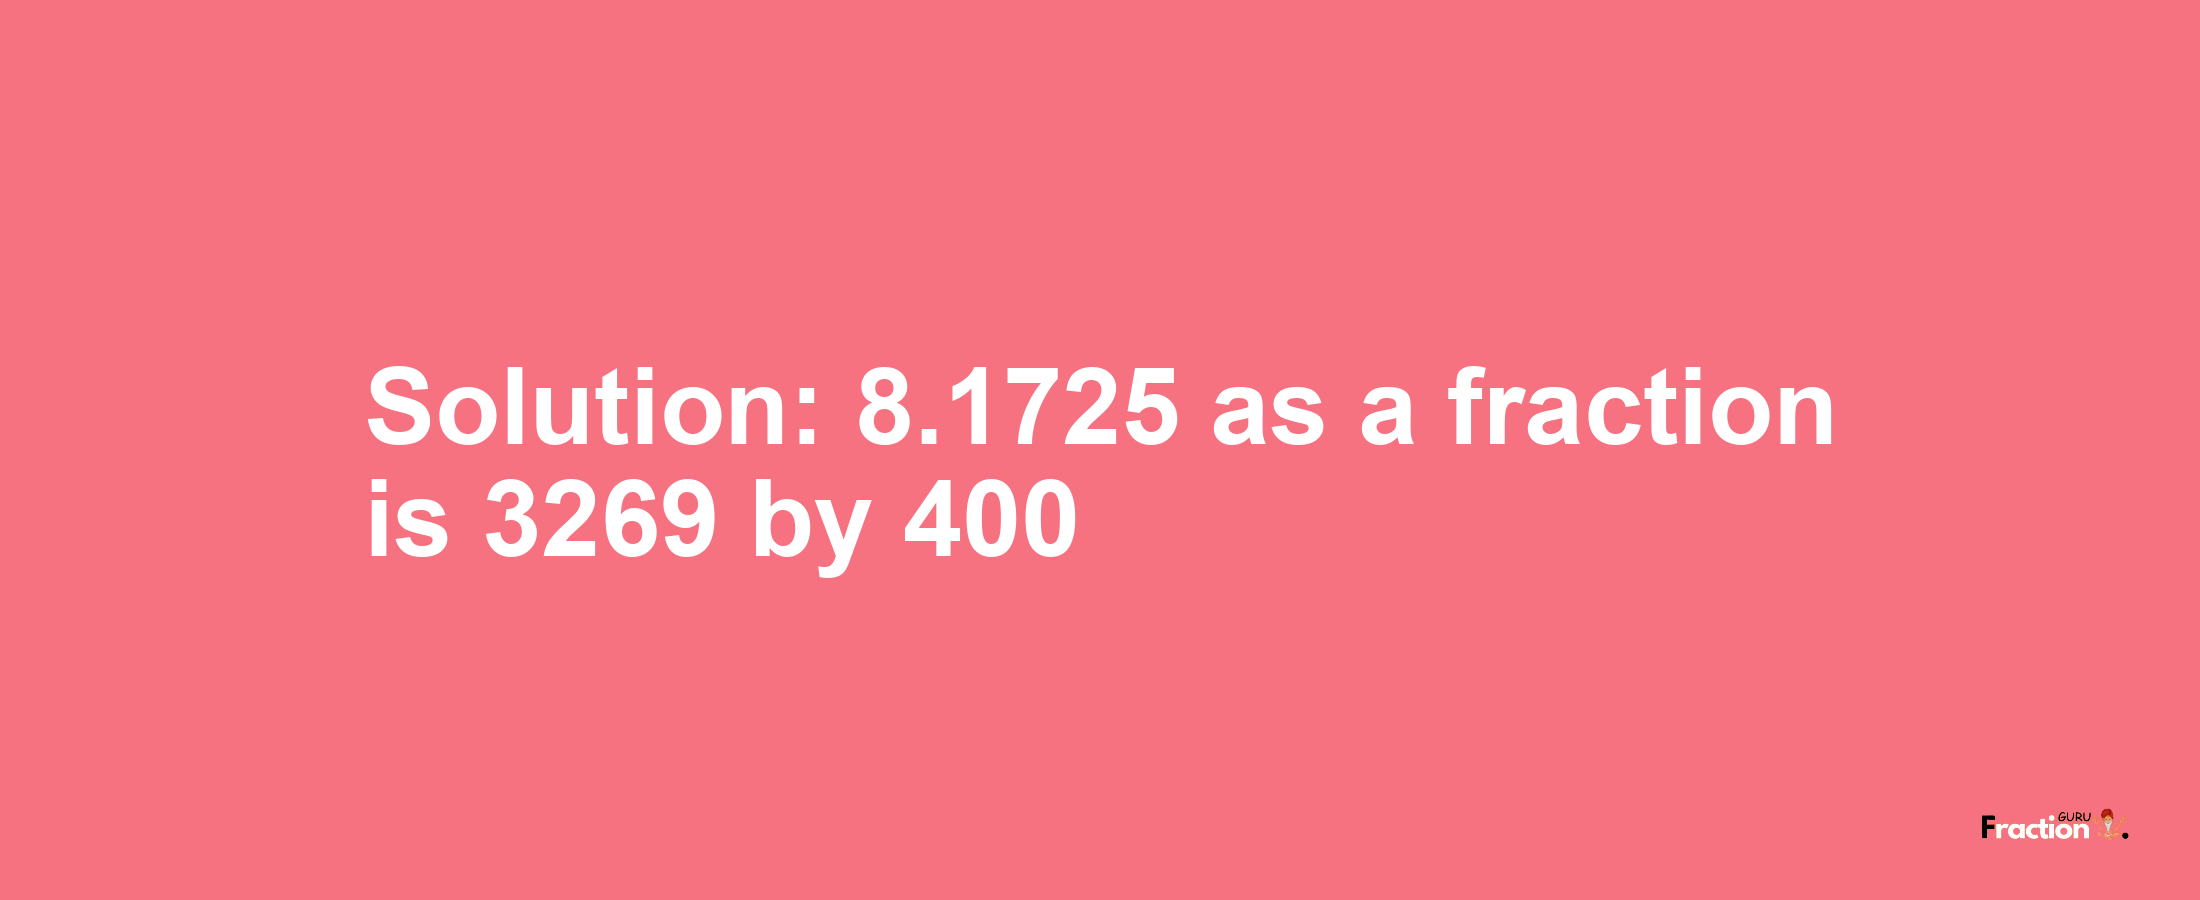 Solution:8.1725 as a fraction is 3269/400